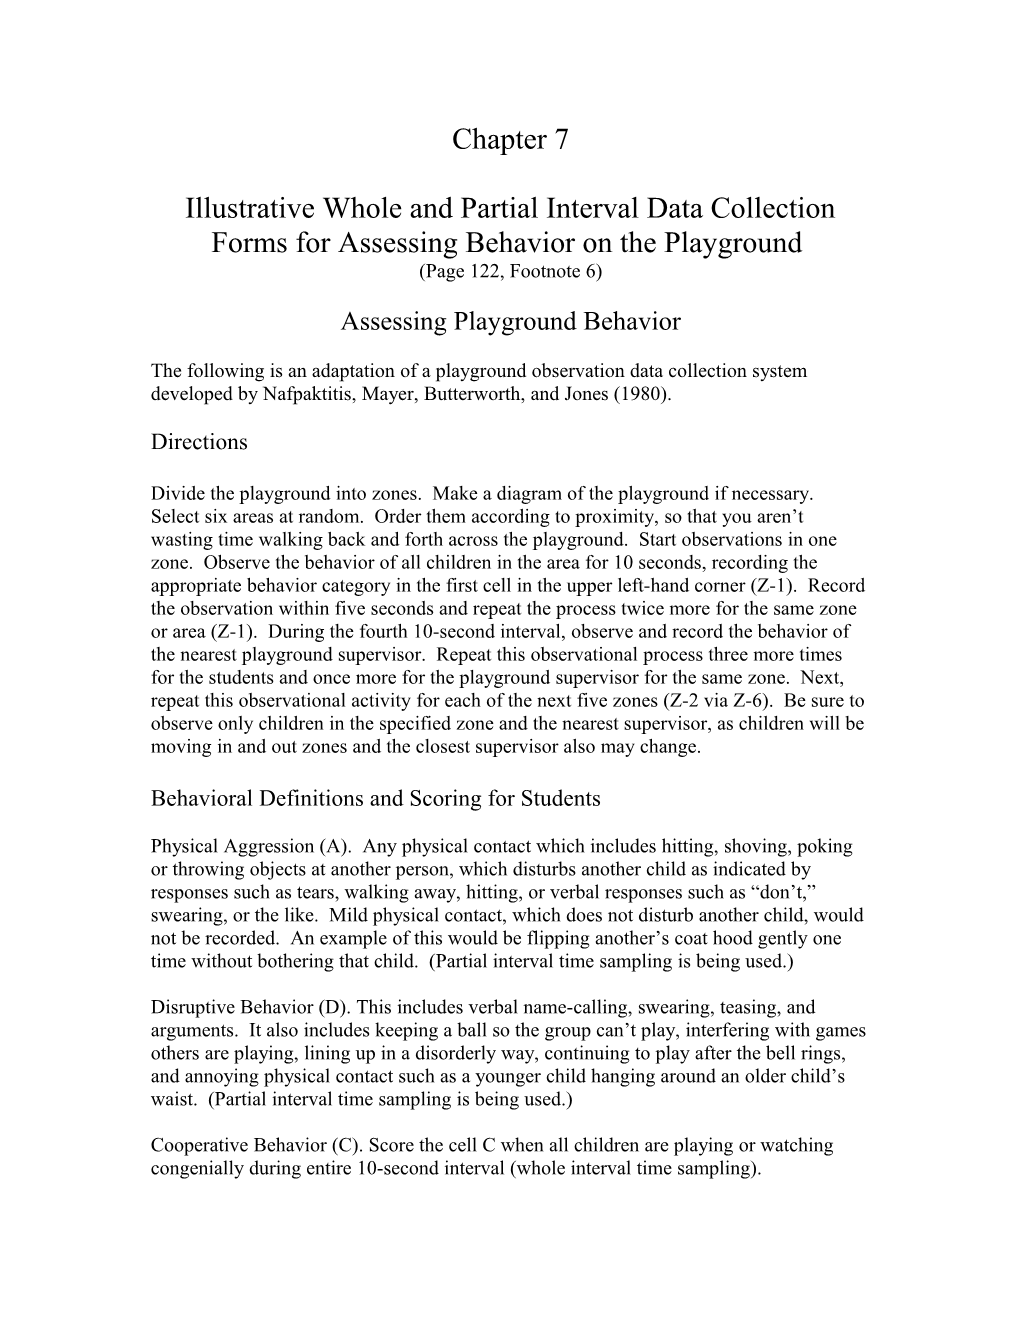 Illustrative Whole and Partial Interval Data Collection Forms for Assessing Behavior On